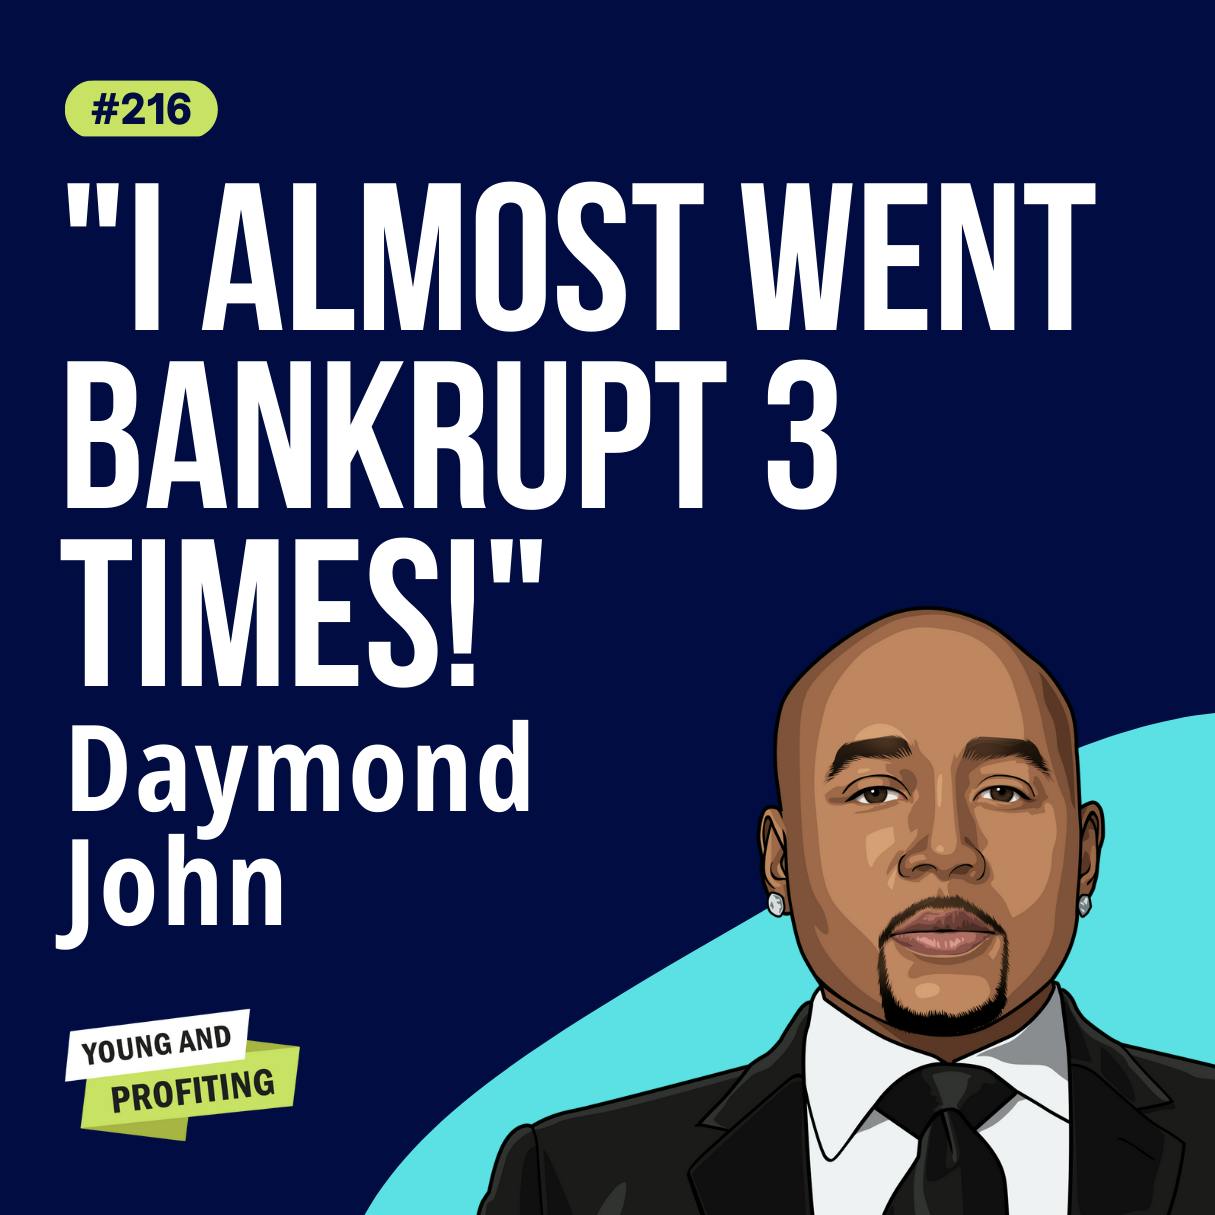 Daymond John: Learn to Earn, How The People's Shark is Raising a New Generation of Financially-Savvy People | E216  by Hala Taha | YAP Media Network